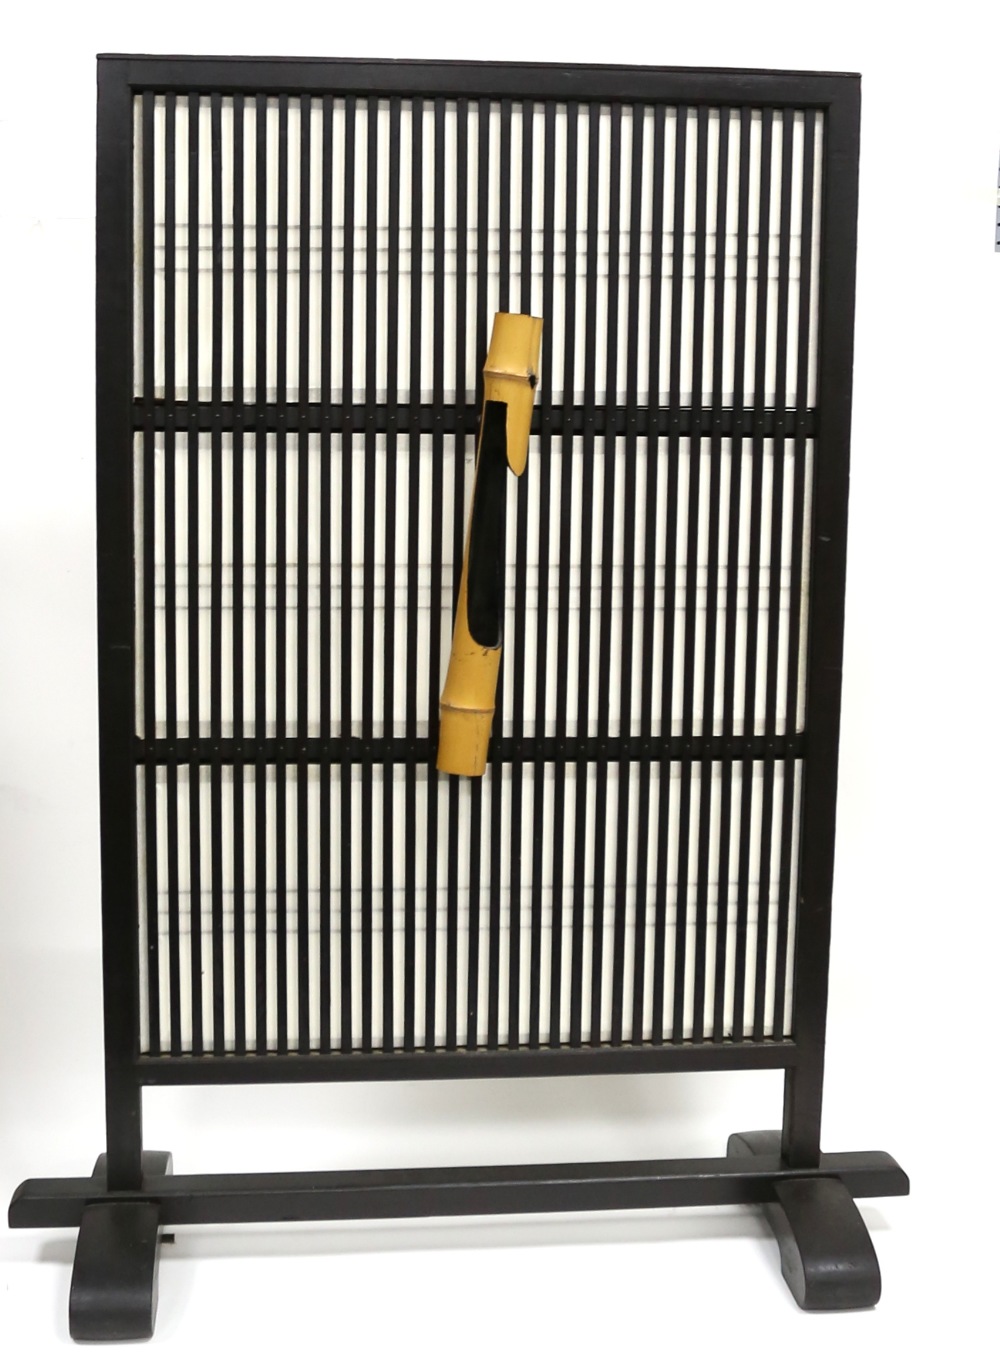 Japanese black lacquered screen 68W x 3D x 102H cm - Image 4 of 4